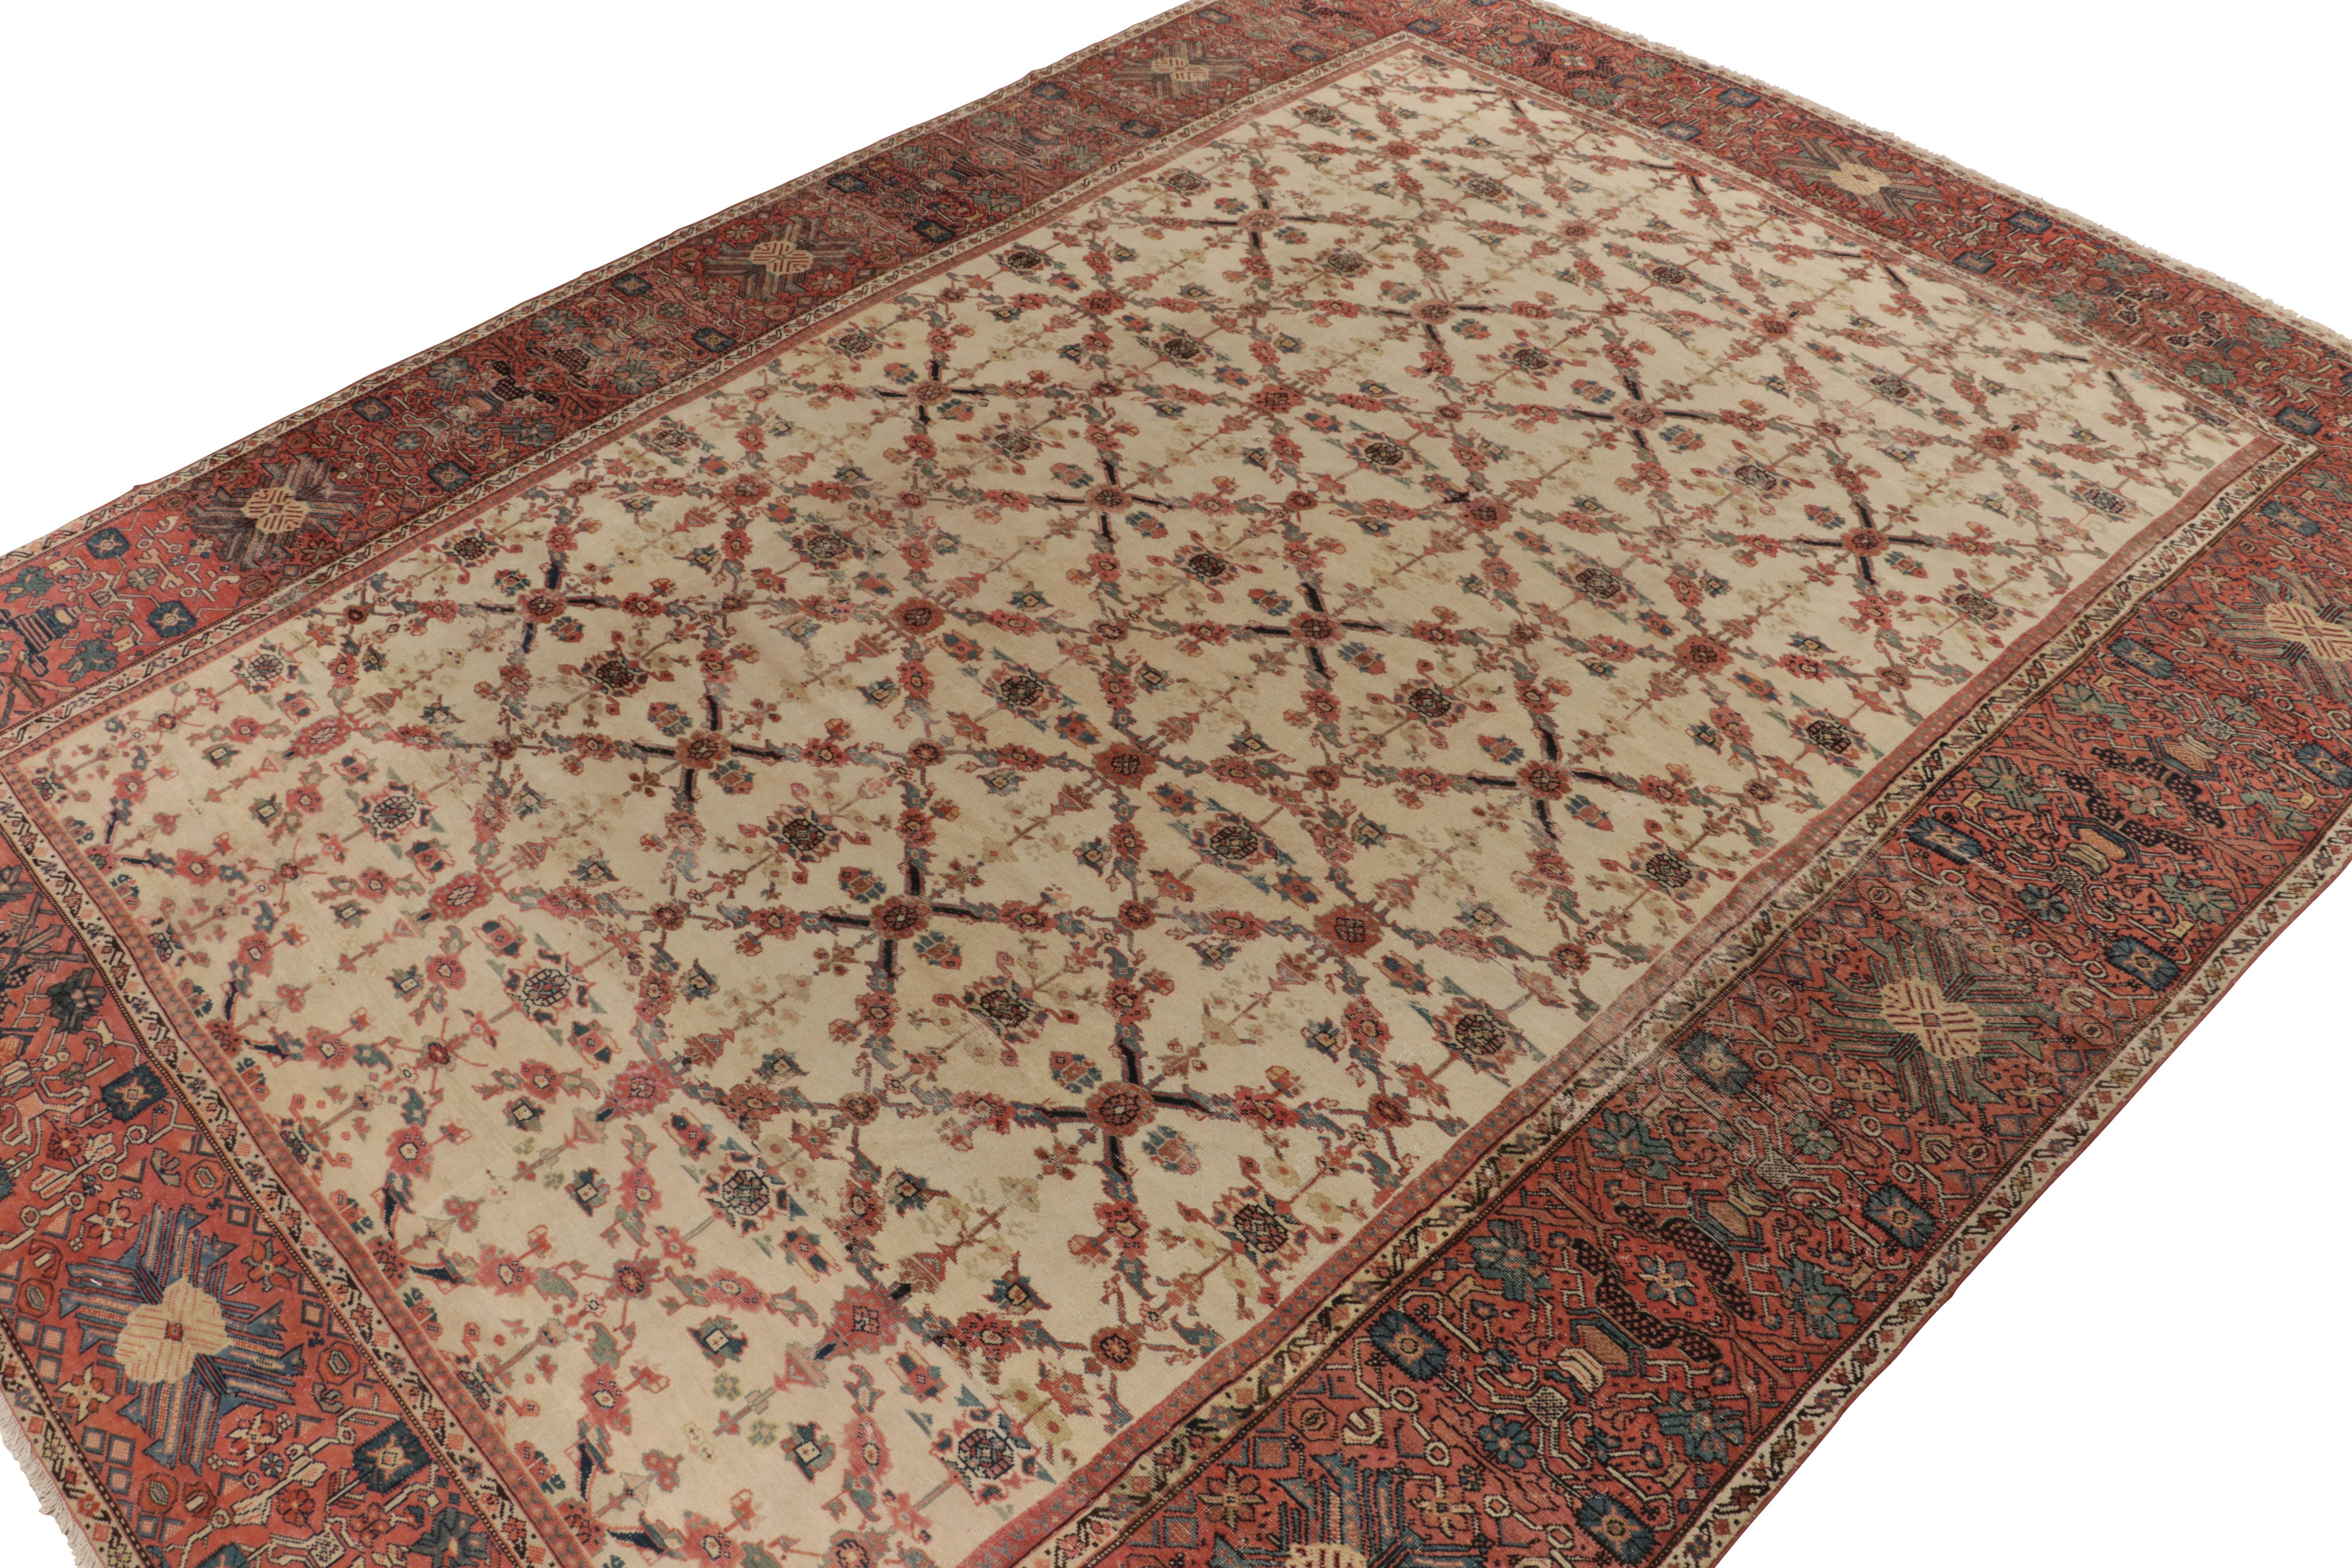 Hand-knotted in wool circa 1880-1900, this 13x17 antique Persian Sultanabad rug is a rare curation.

On the Design: 

Connoisseurs will admire this oversized piece as a collectible choice among 19th century rugs of this traditional provenance. Its